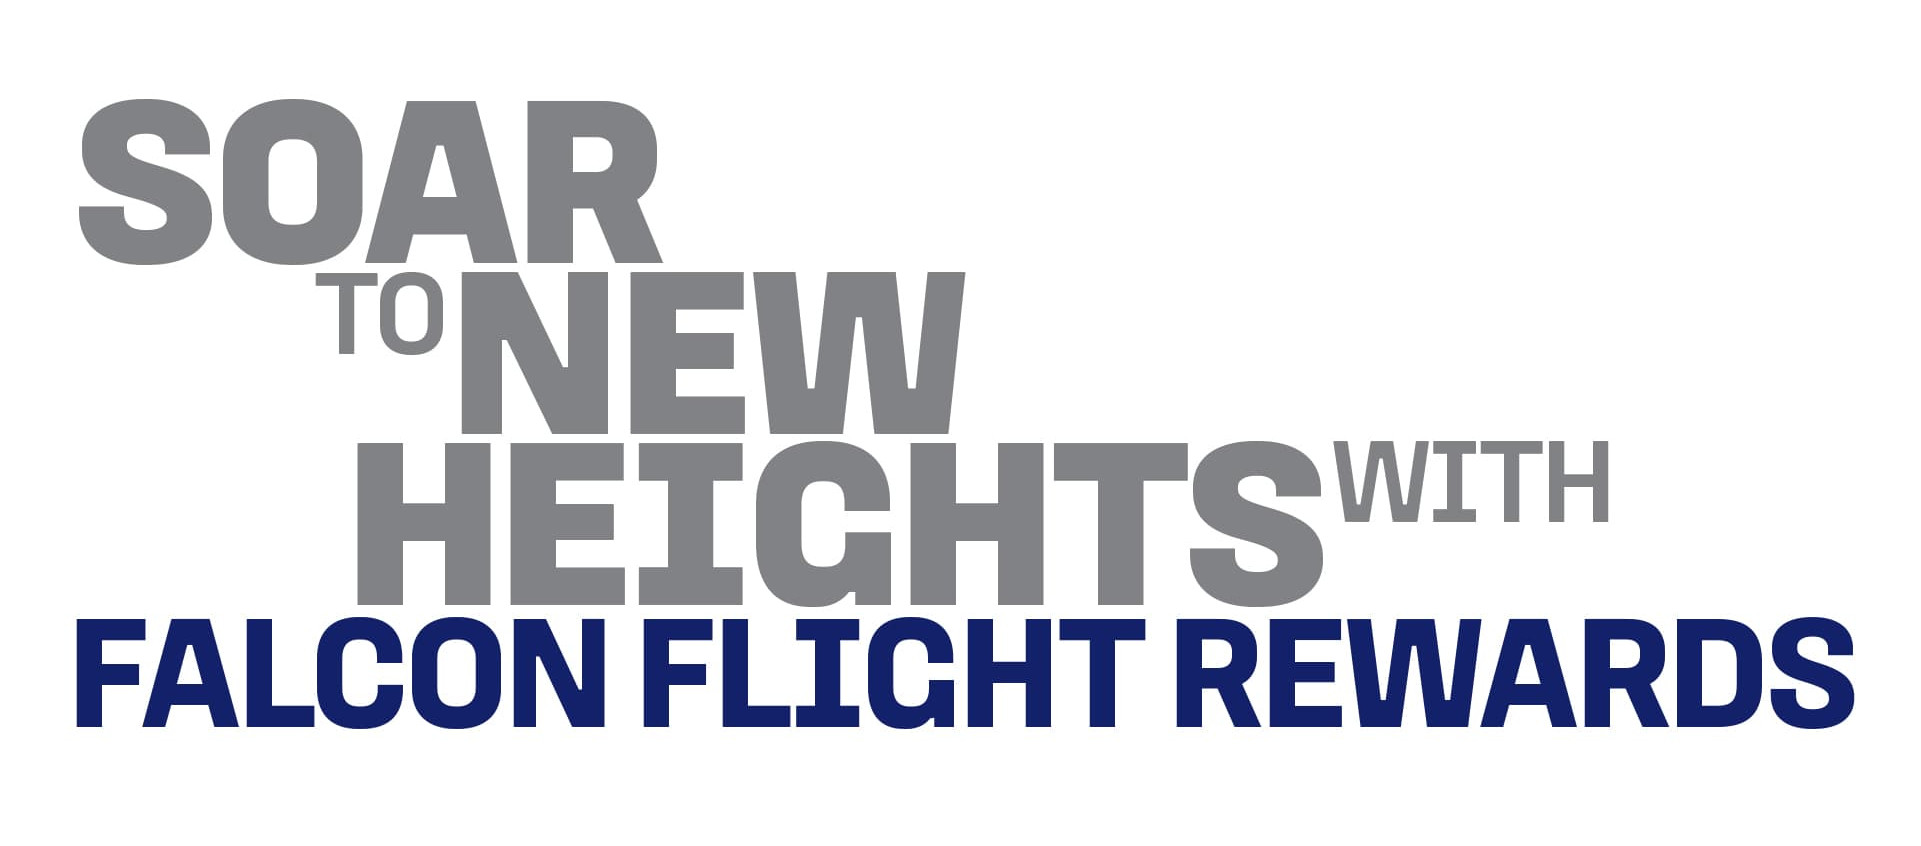 Soar to new heights with Falcon Flight Rewards